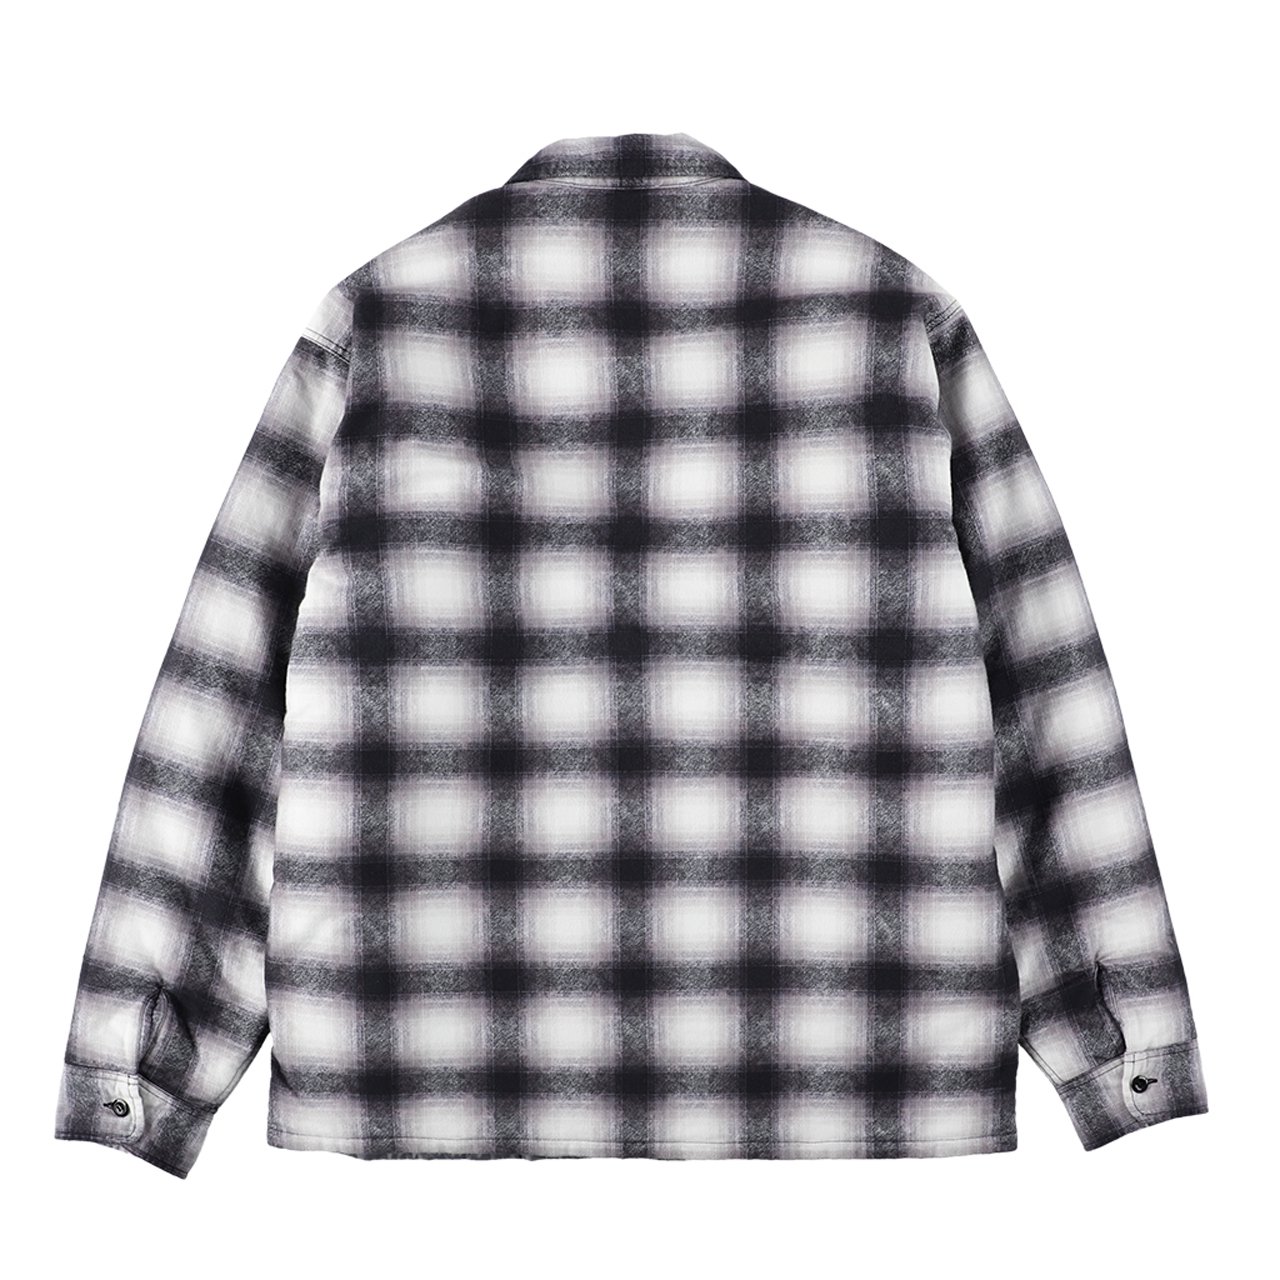 STANDARD CALIFORNIA (スタンダード カリフォルニア)23AW/秋冬
Quilted Print Flannel Check Shirt Jacket